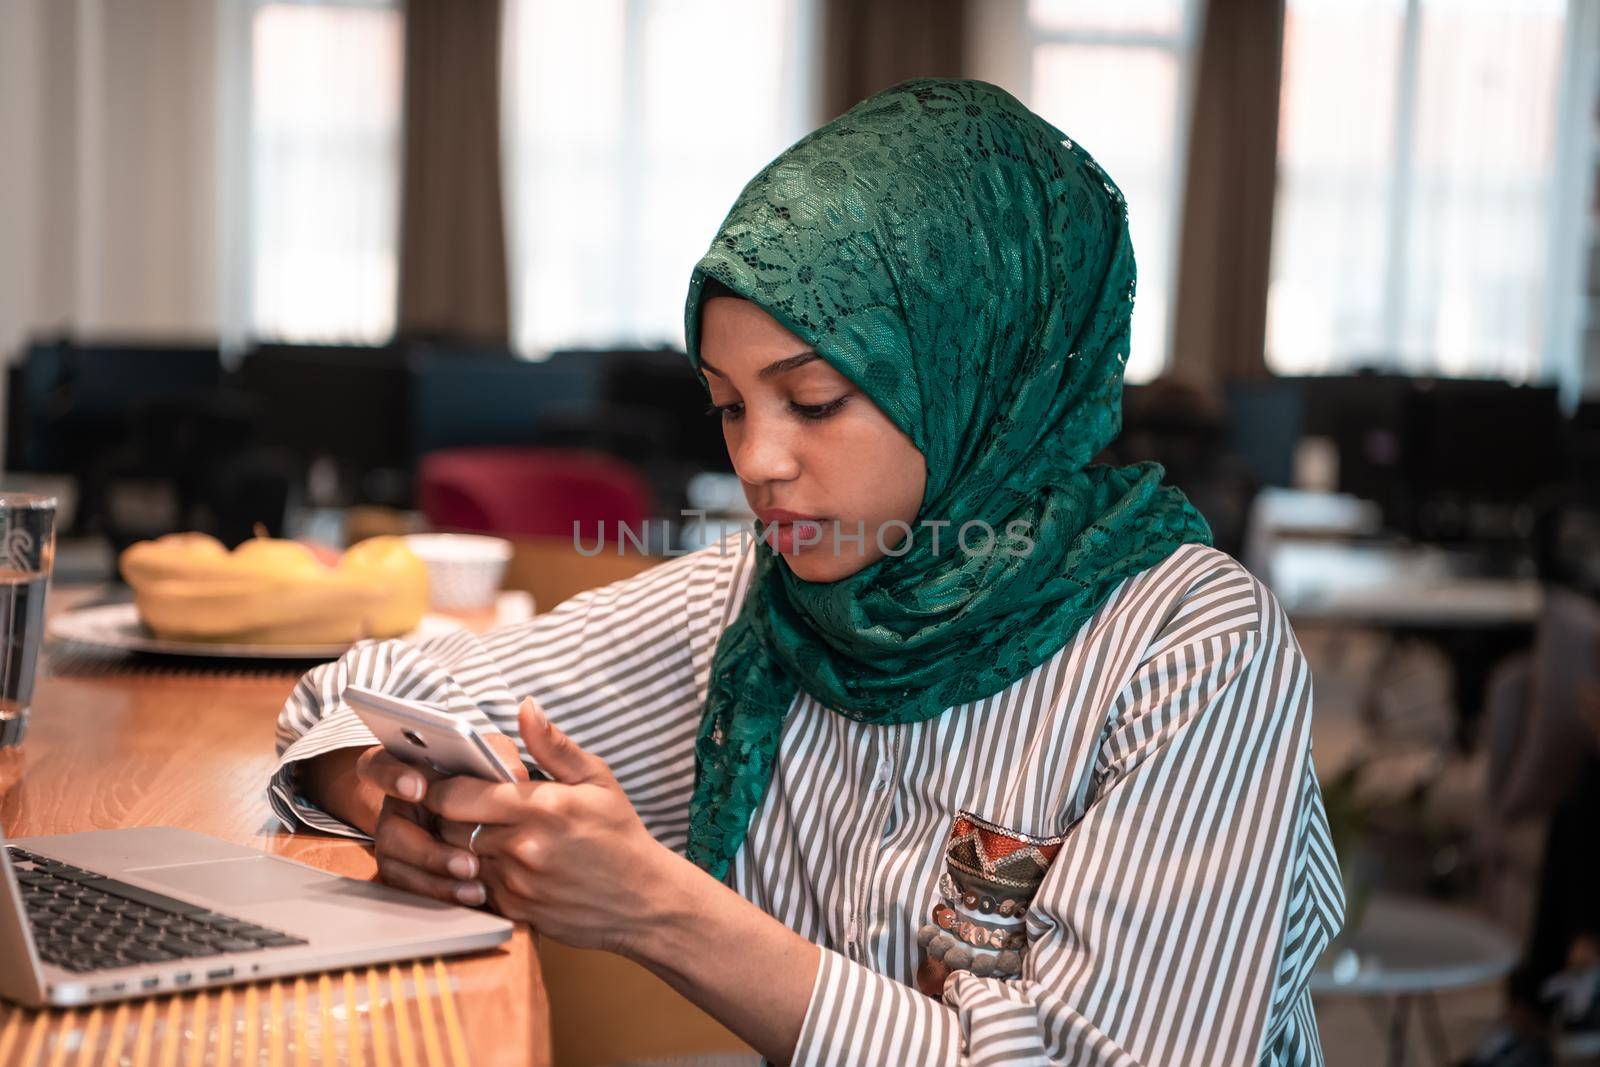 African Muslim businesswoman wearing a green hijab using smartphone while working on laptop computer in relaxation area at modern open plan startup office.High-quality photo